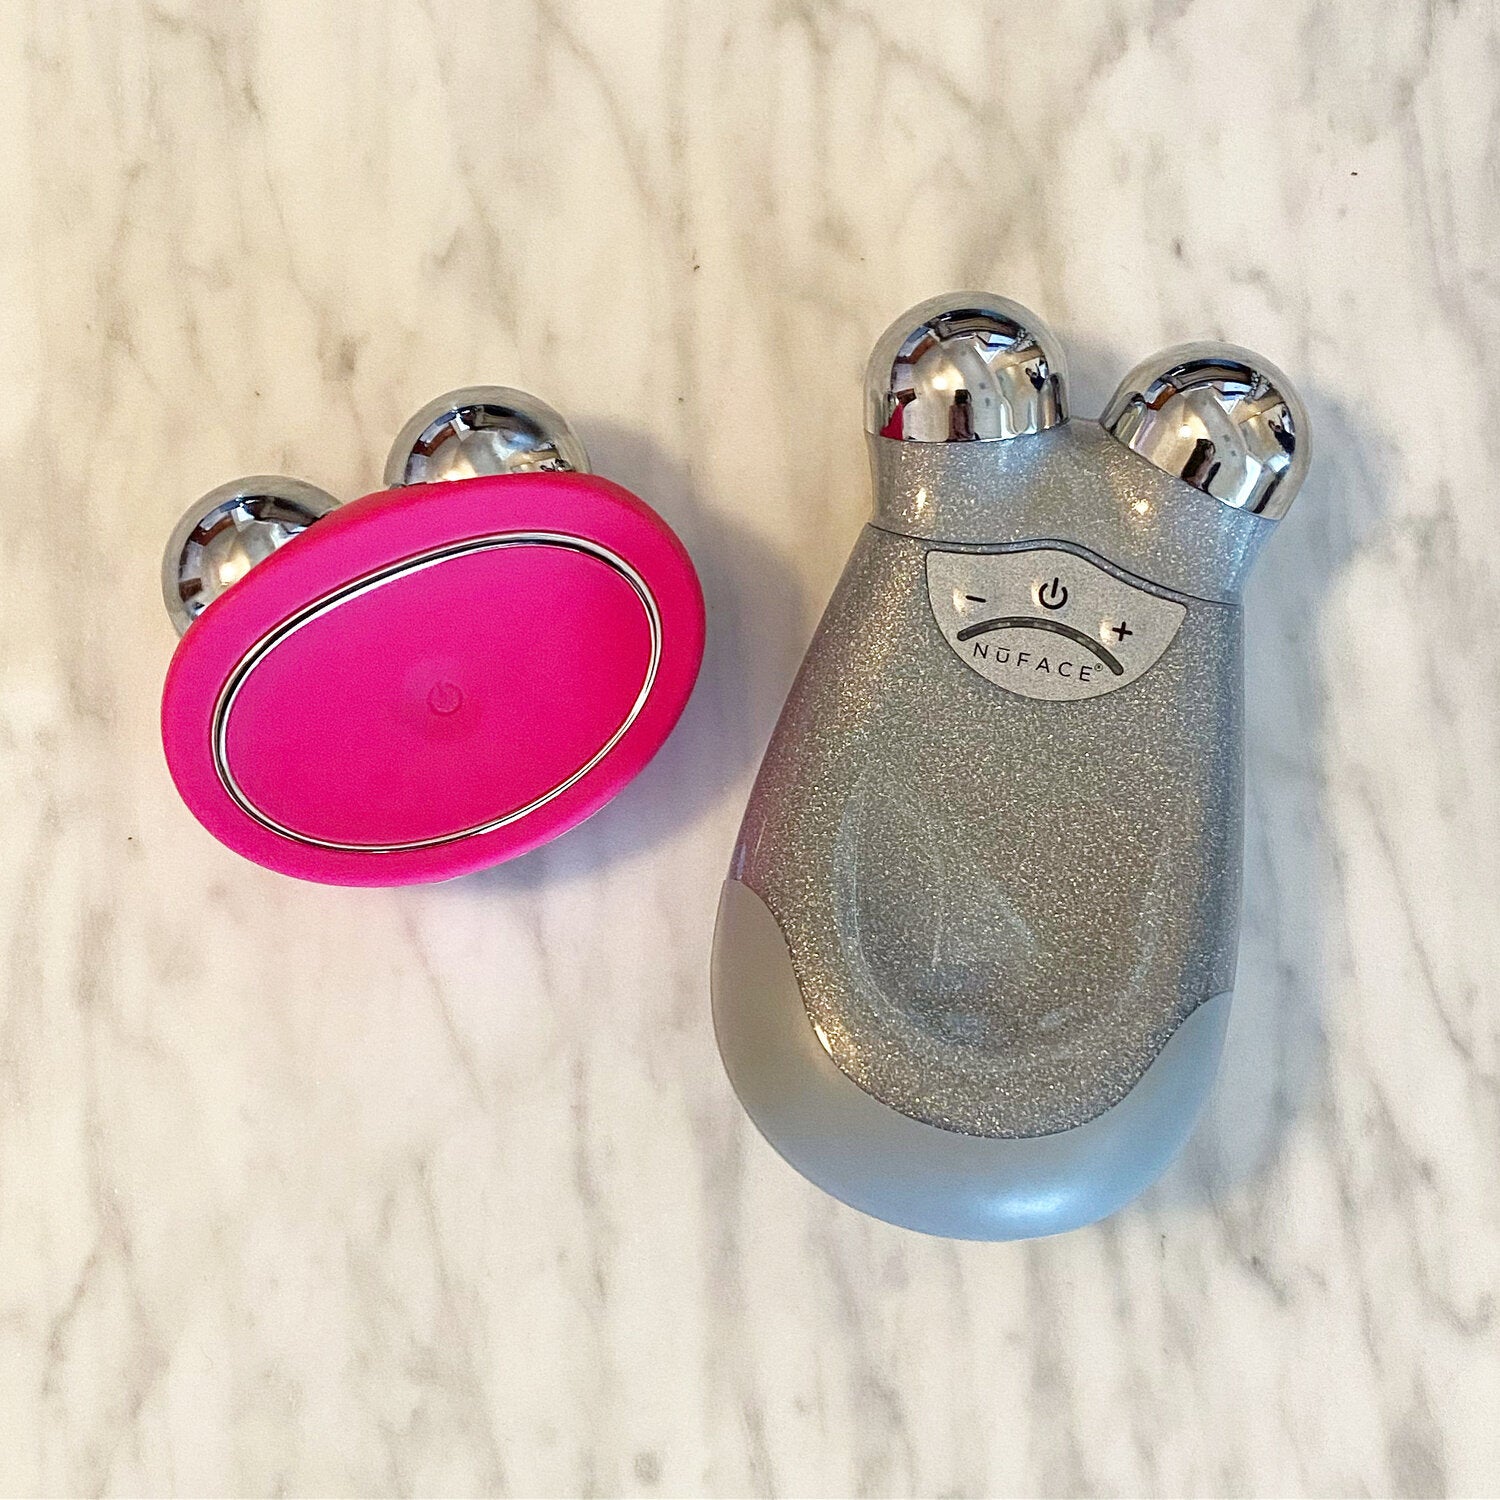 FOREO Bear vs. NuFace Trinity: Which At-Home Microcurrent Device Is Right For You?